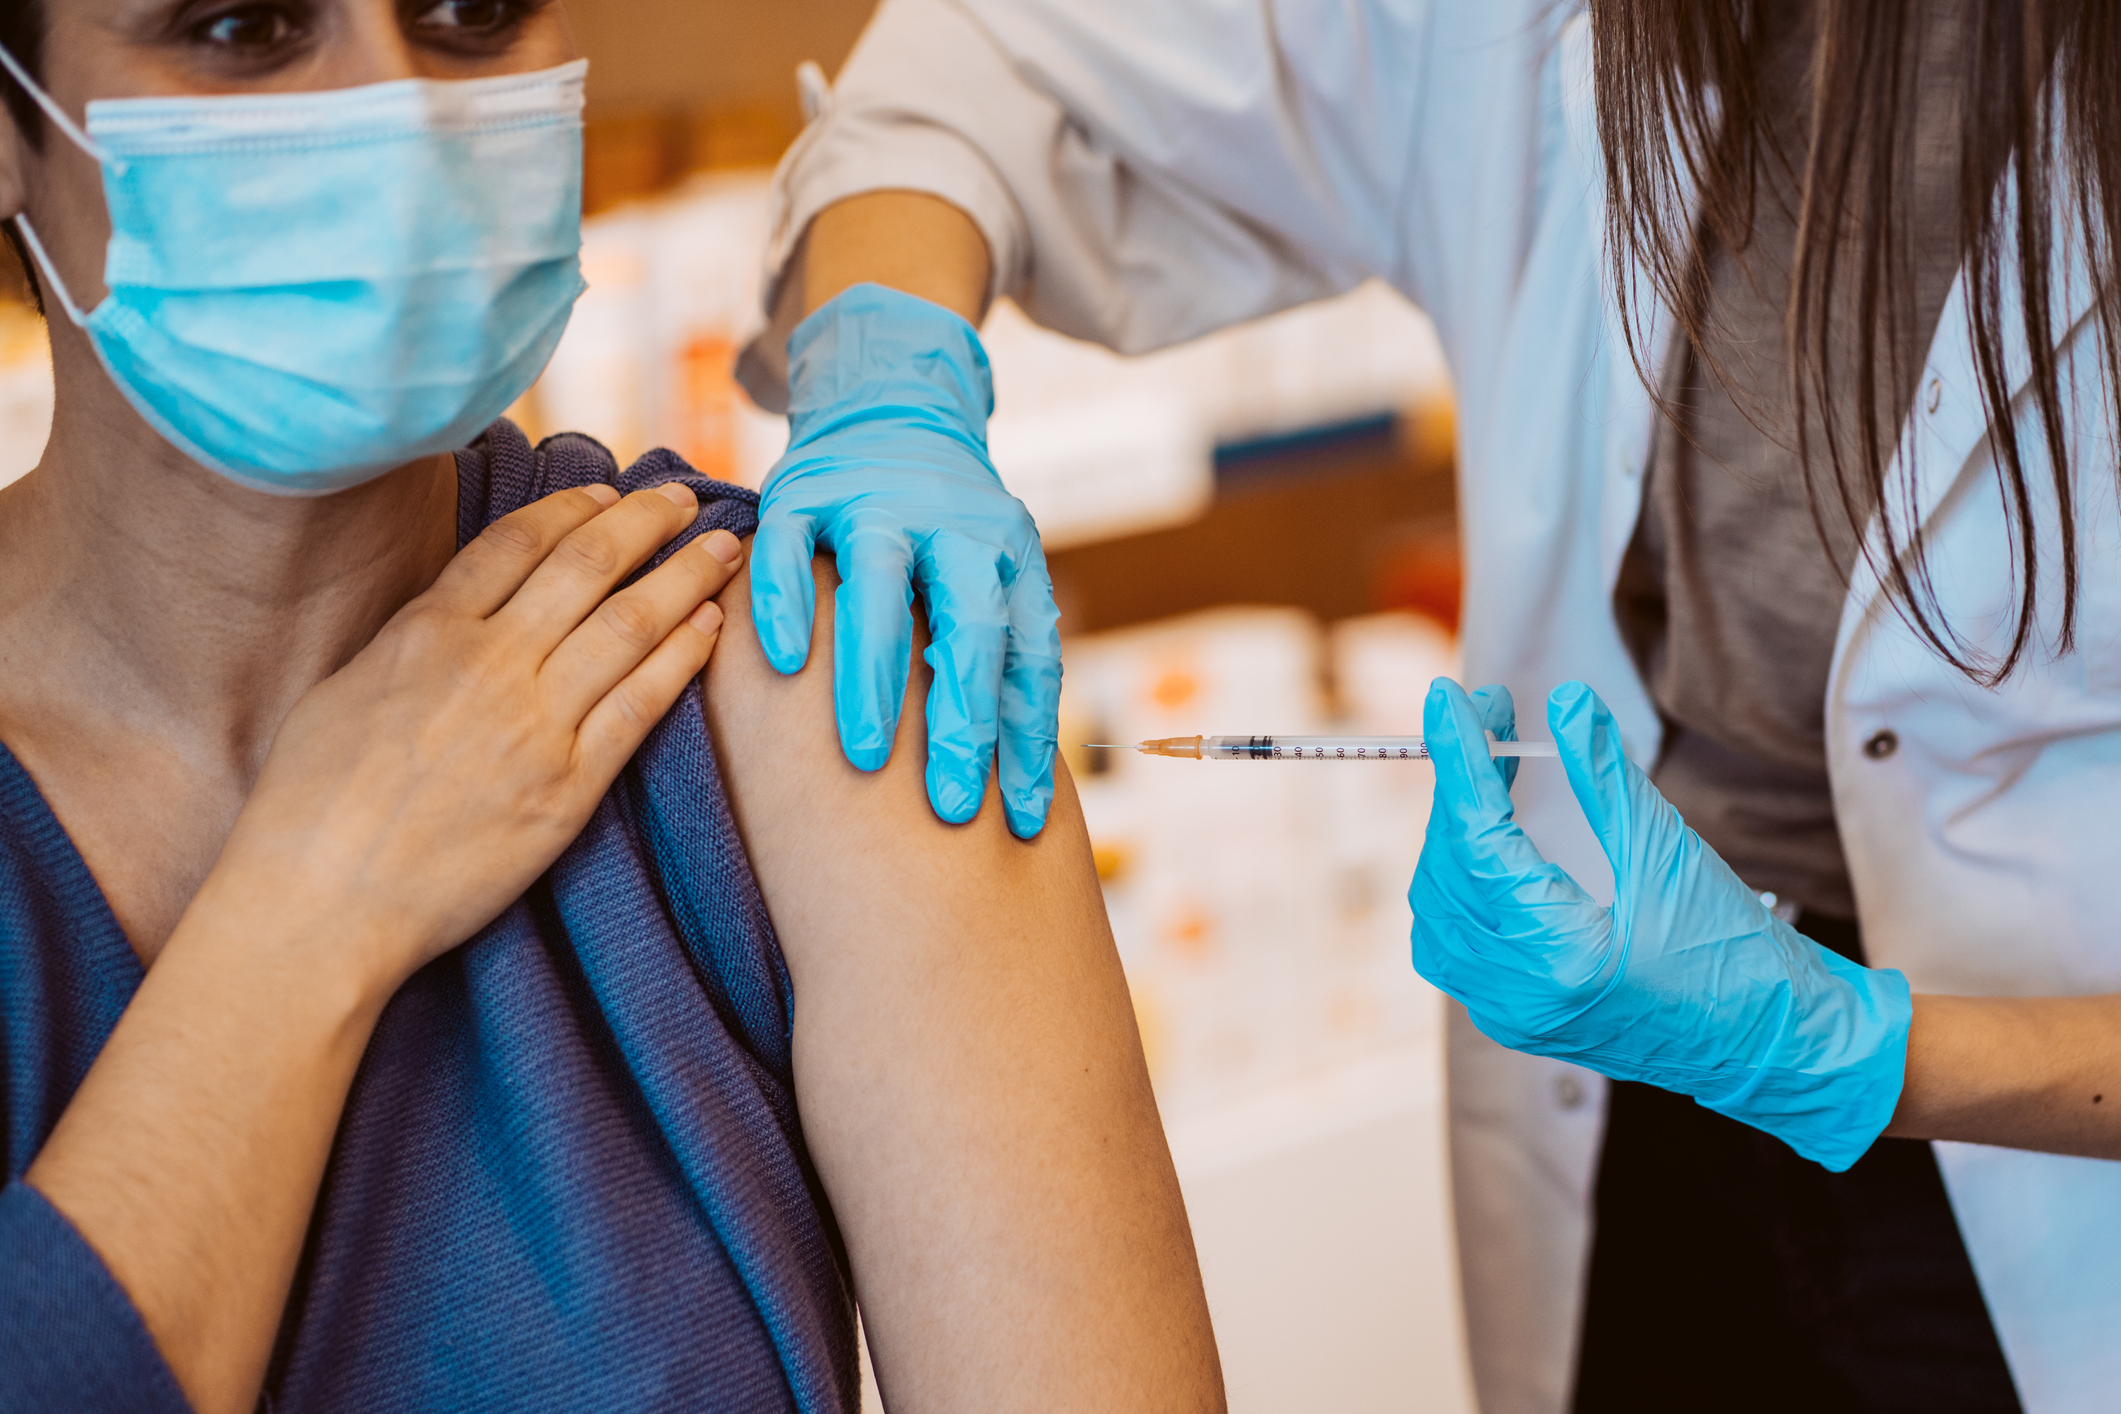 Latina woman wearing surgical mask receives vaccination shot from long brown haired woman wearing white lab coat and blue surgical gloves